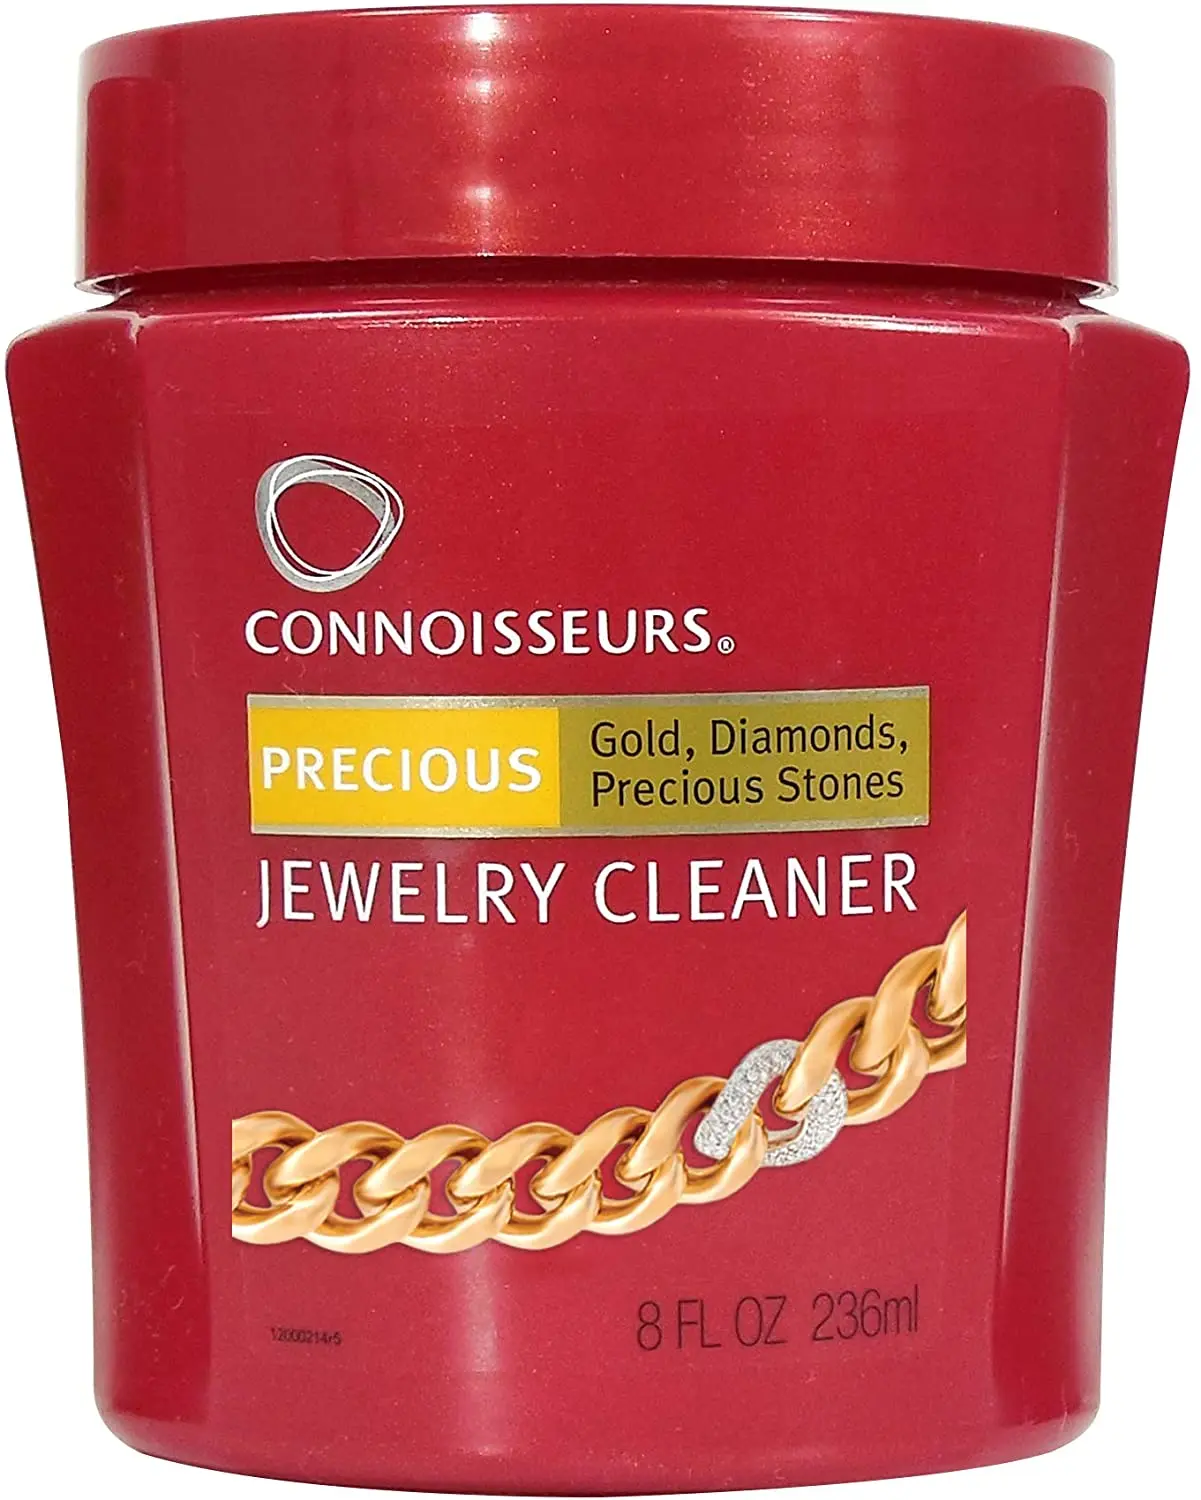 Connoisseurs Precious Jewelry Cleaner 236ml for Gold Diamond Stone Cleaning